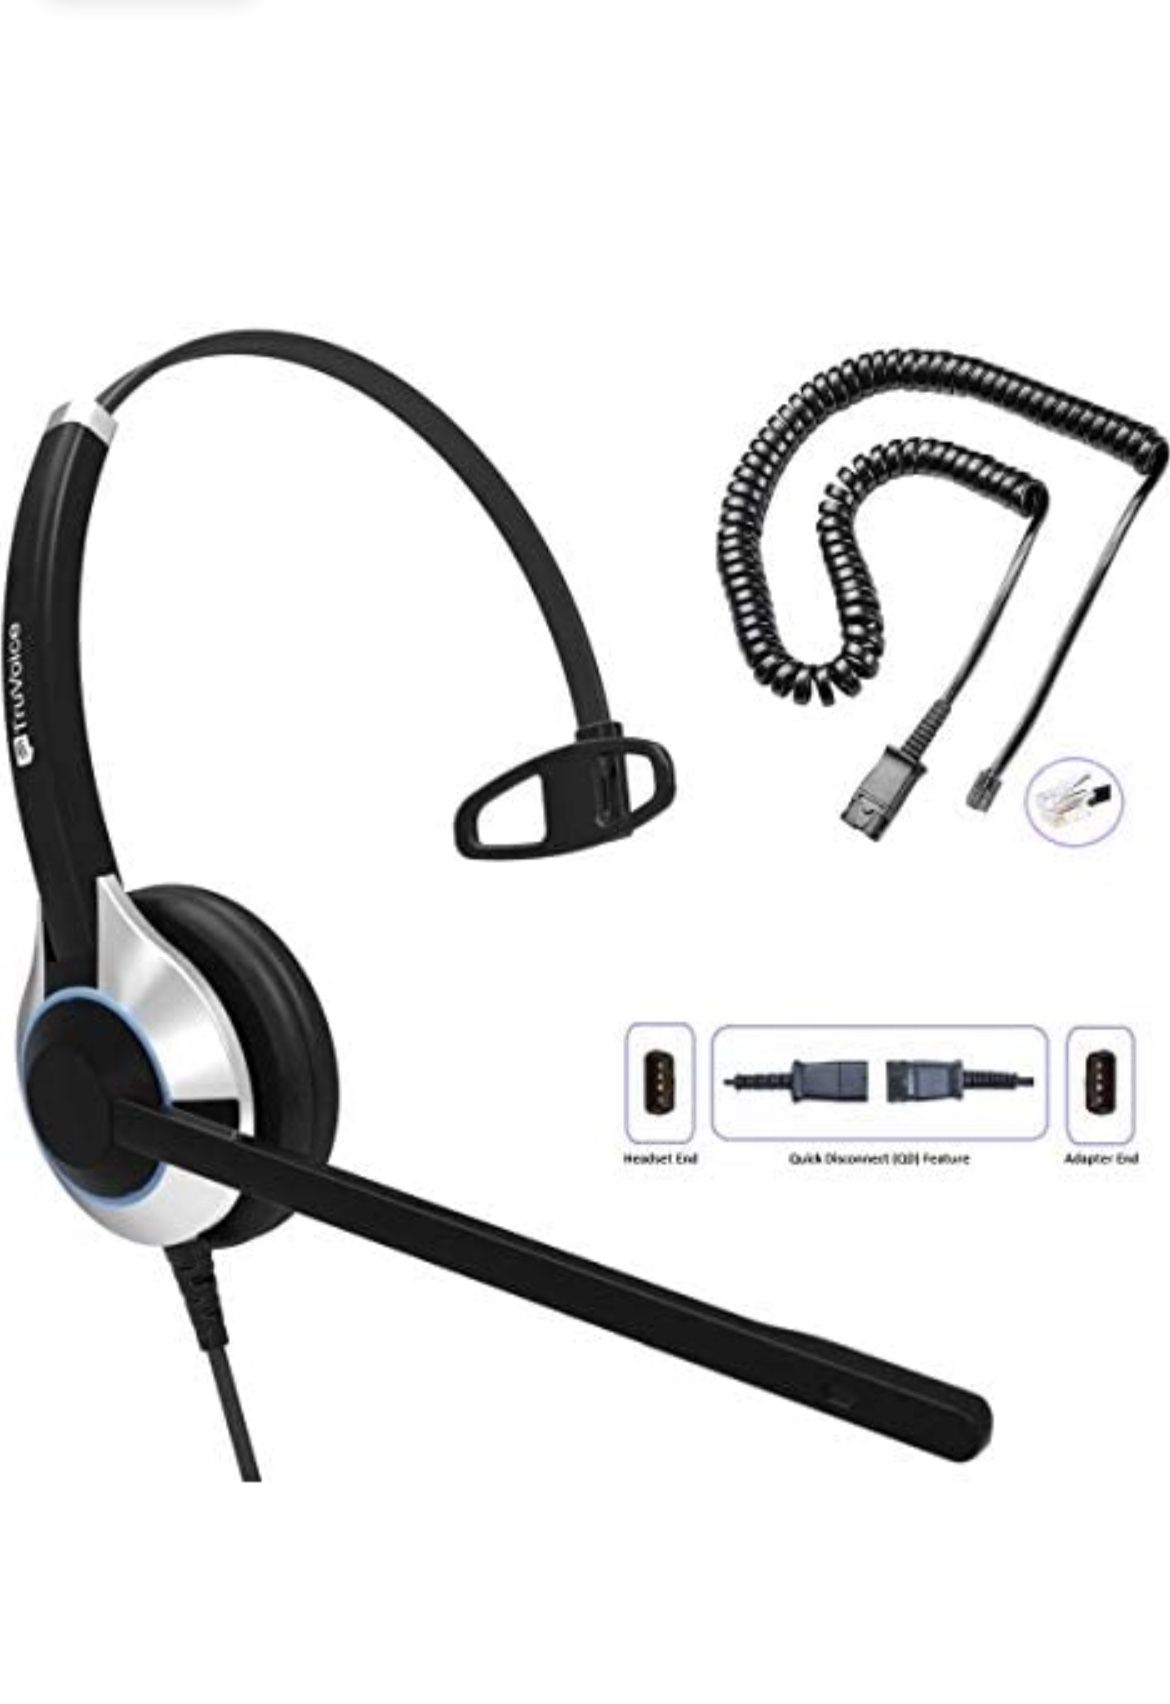 NWT TruVoice HD-500 Deluxe Headset